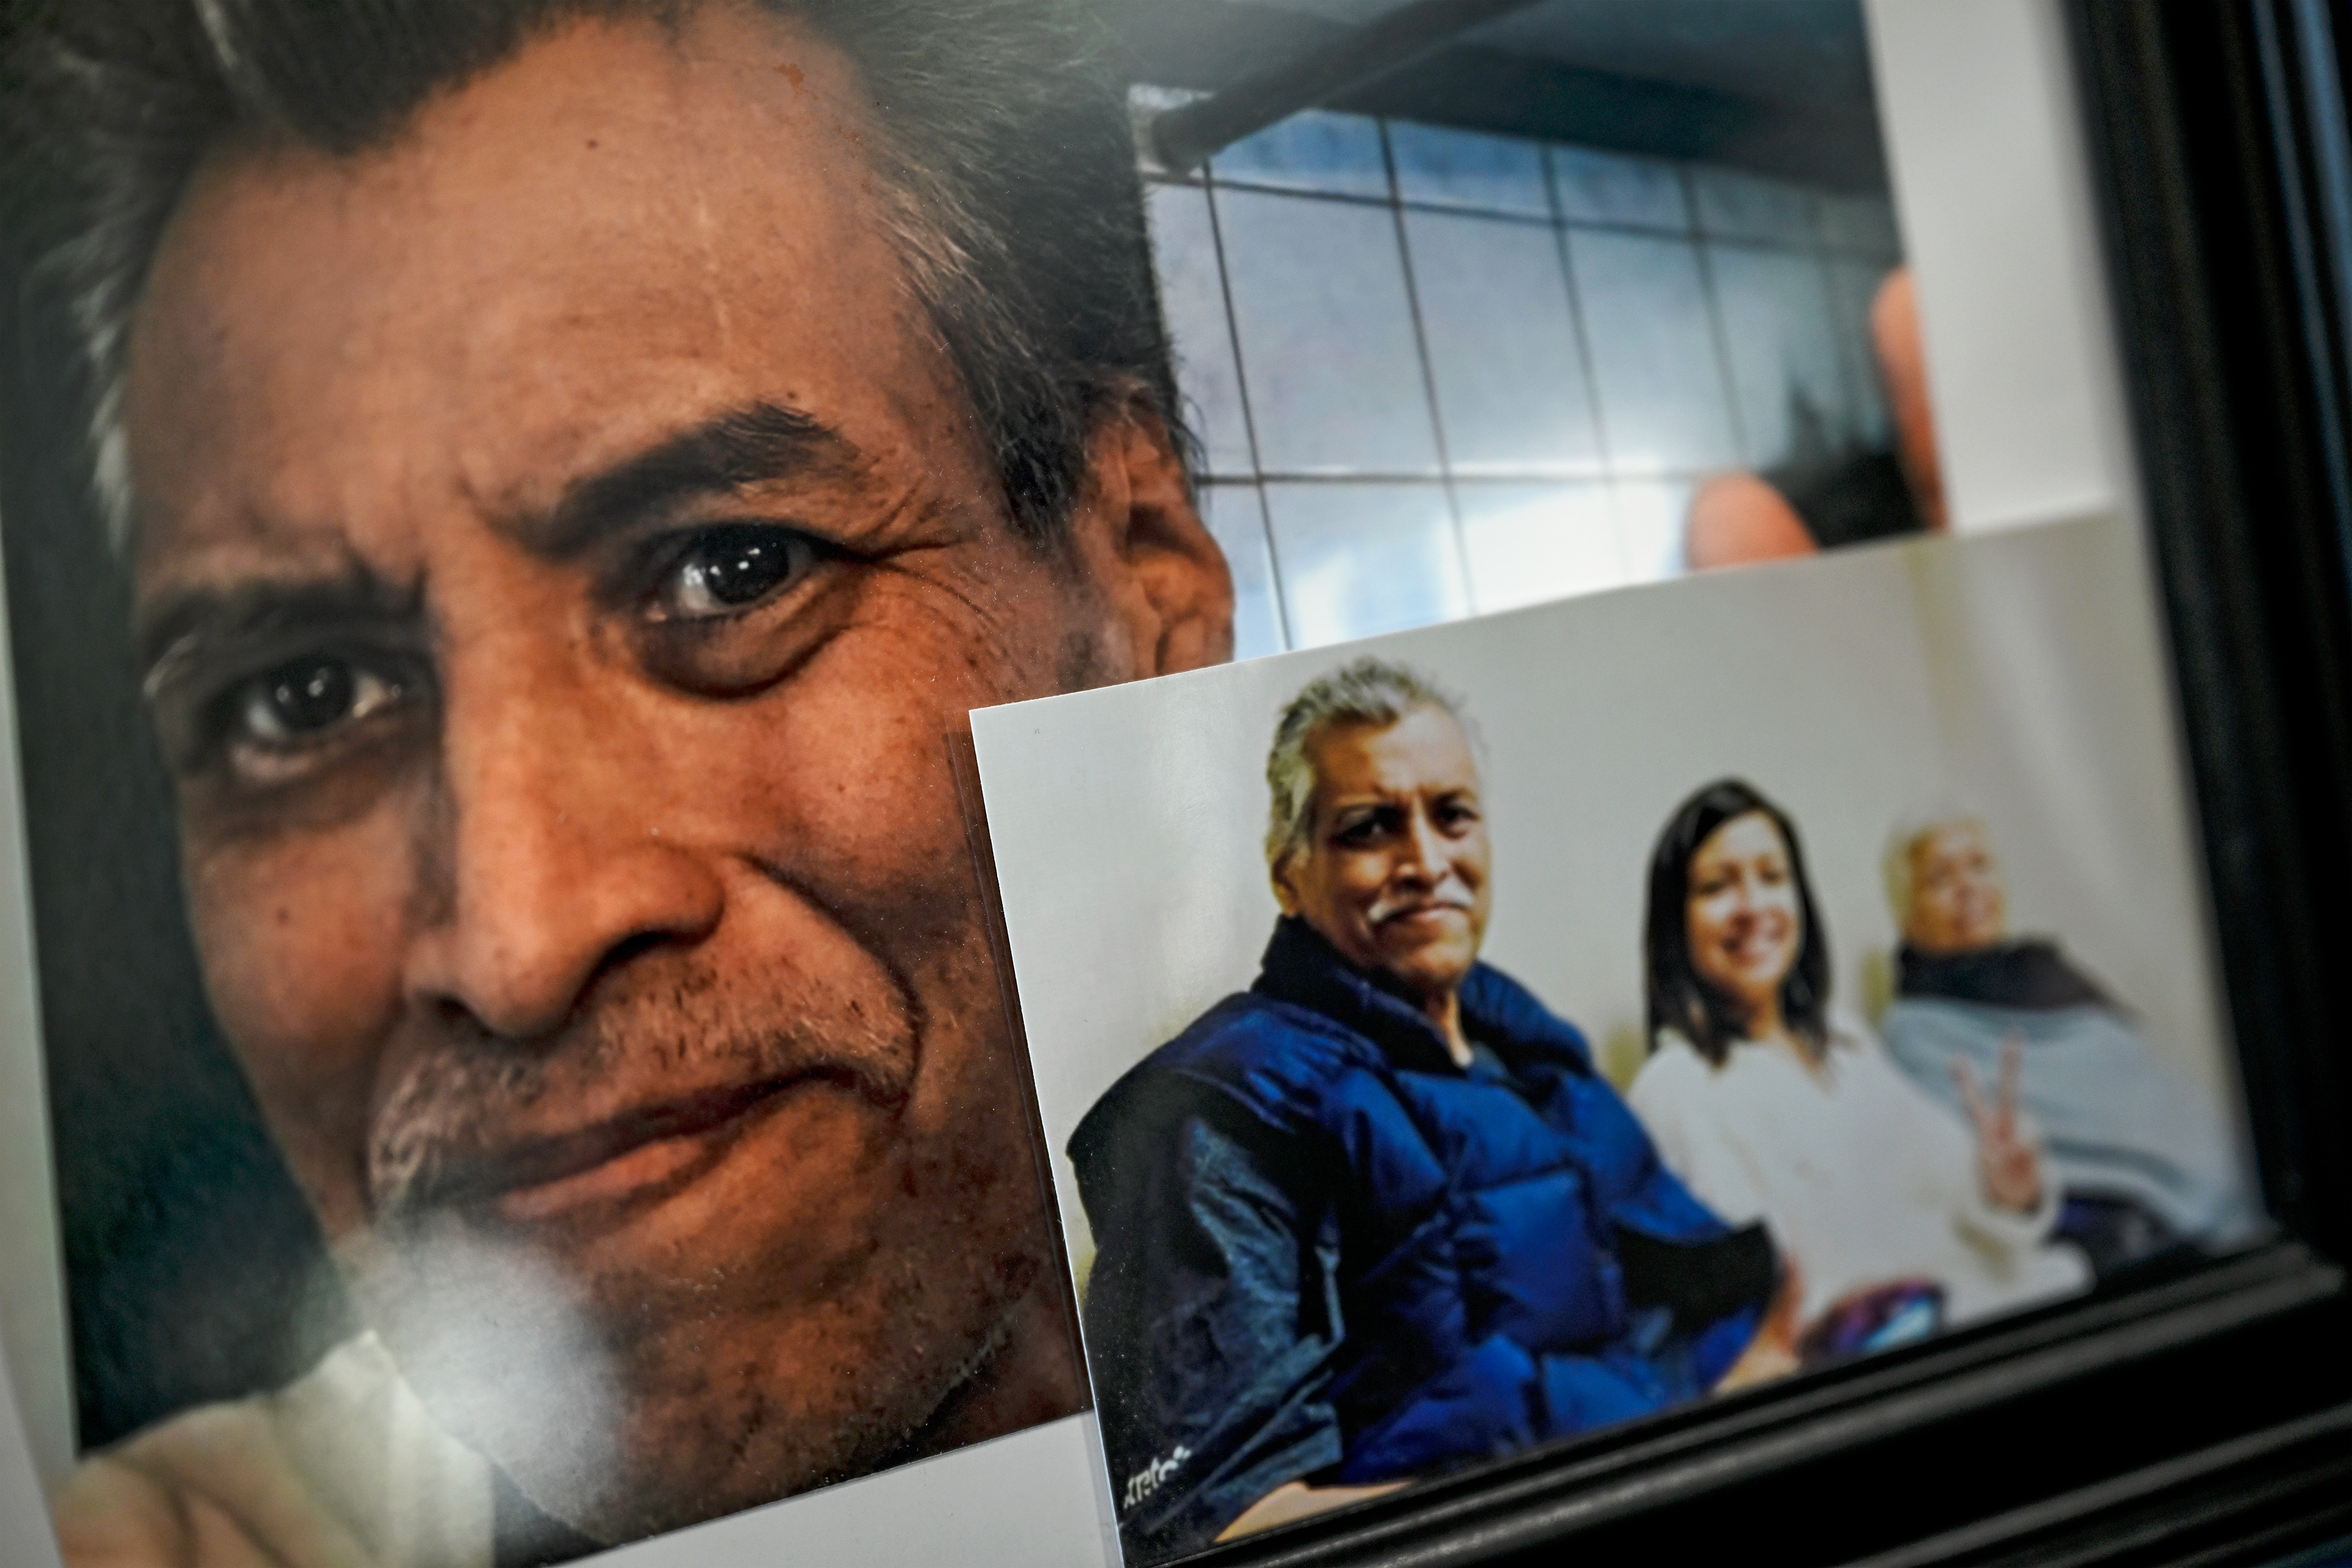 A photo shows two photos of Armando Peniche Rosales' father and family in a picture frame.